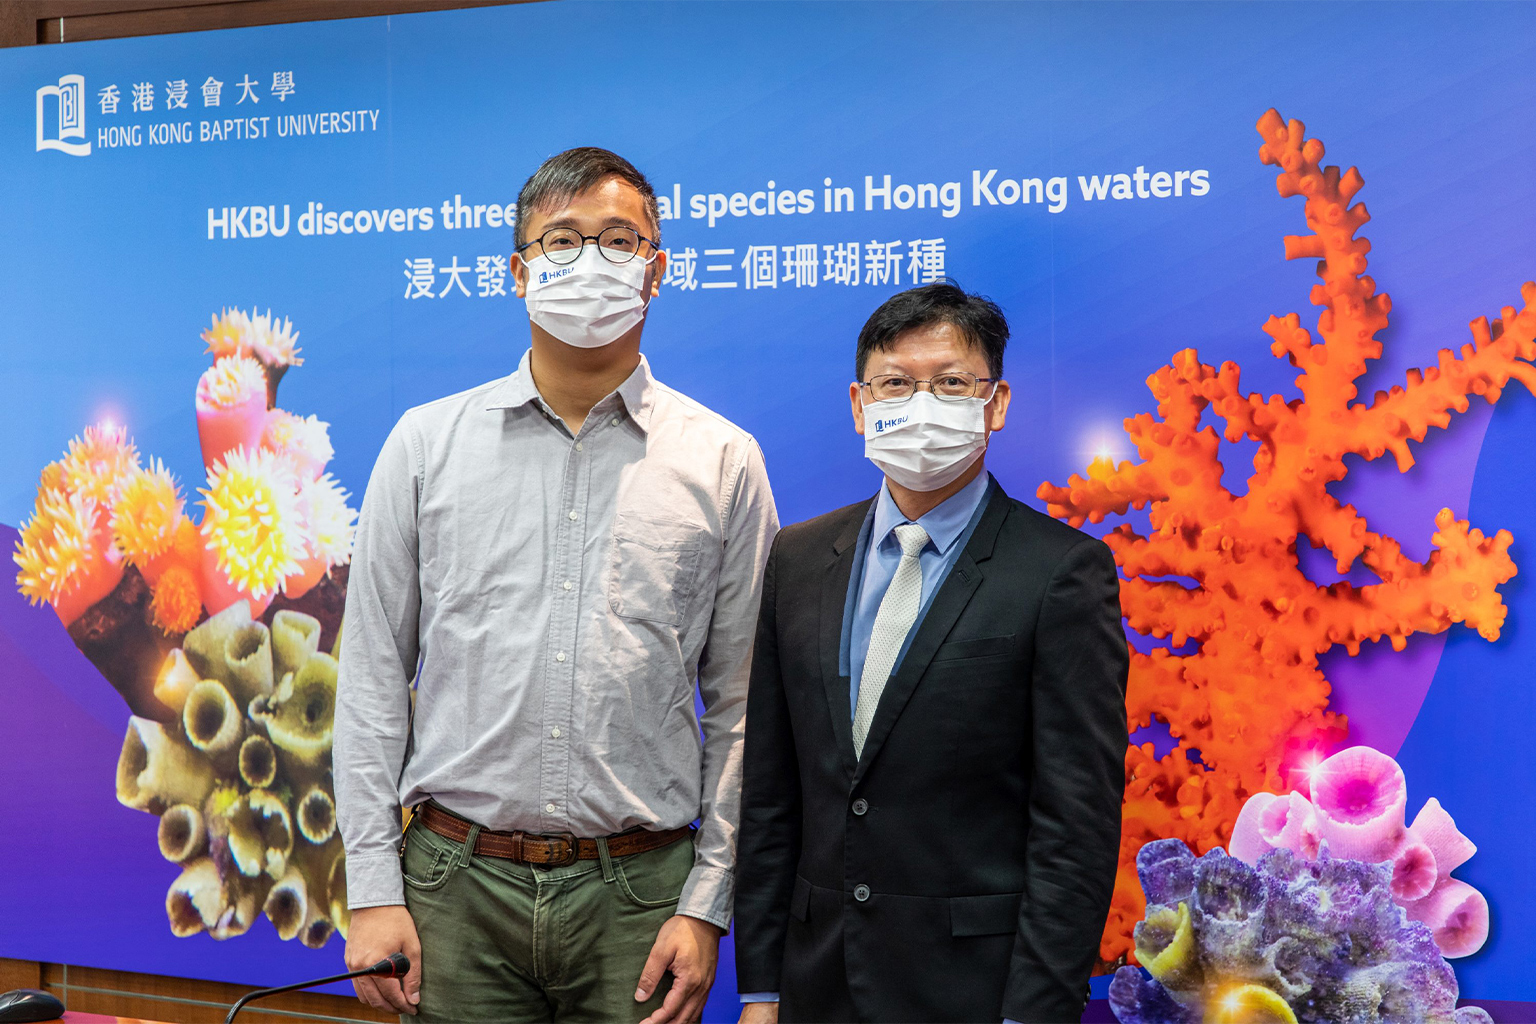 Qiu Jianwen (right) and Yiu King-fung (left) introducing the new coral species.